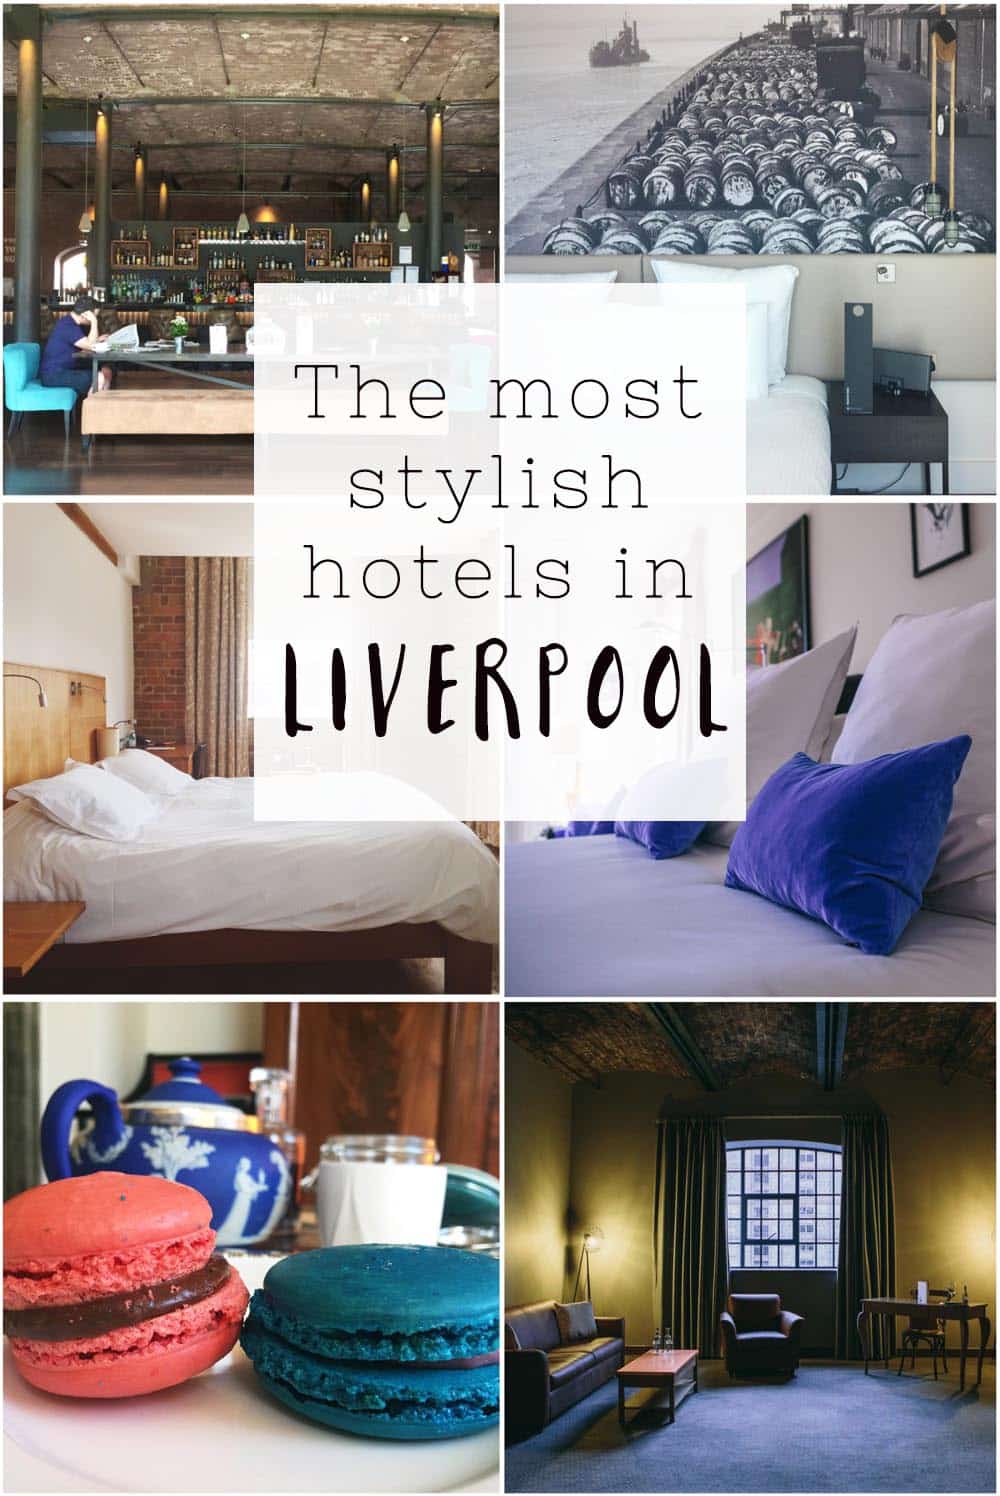 The most stylish and best hotels in Liverpool